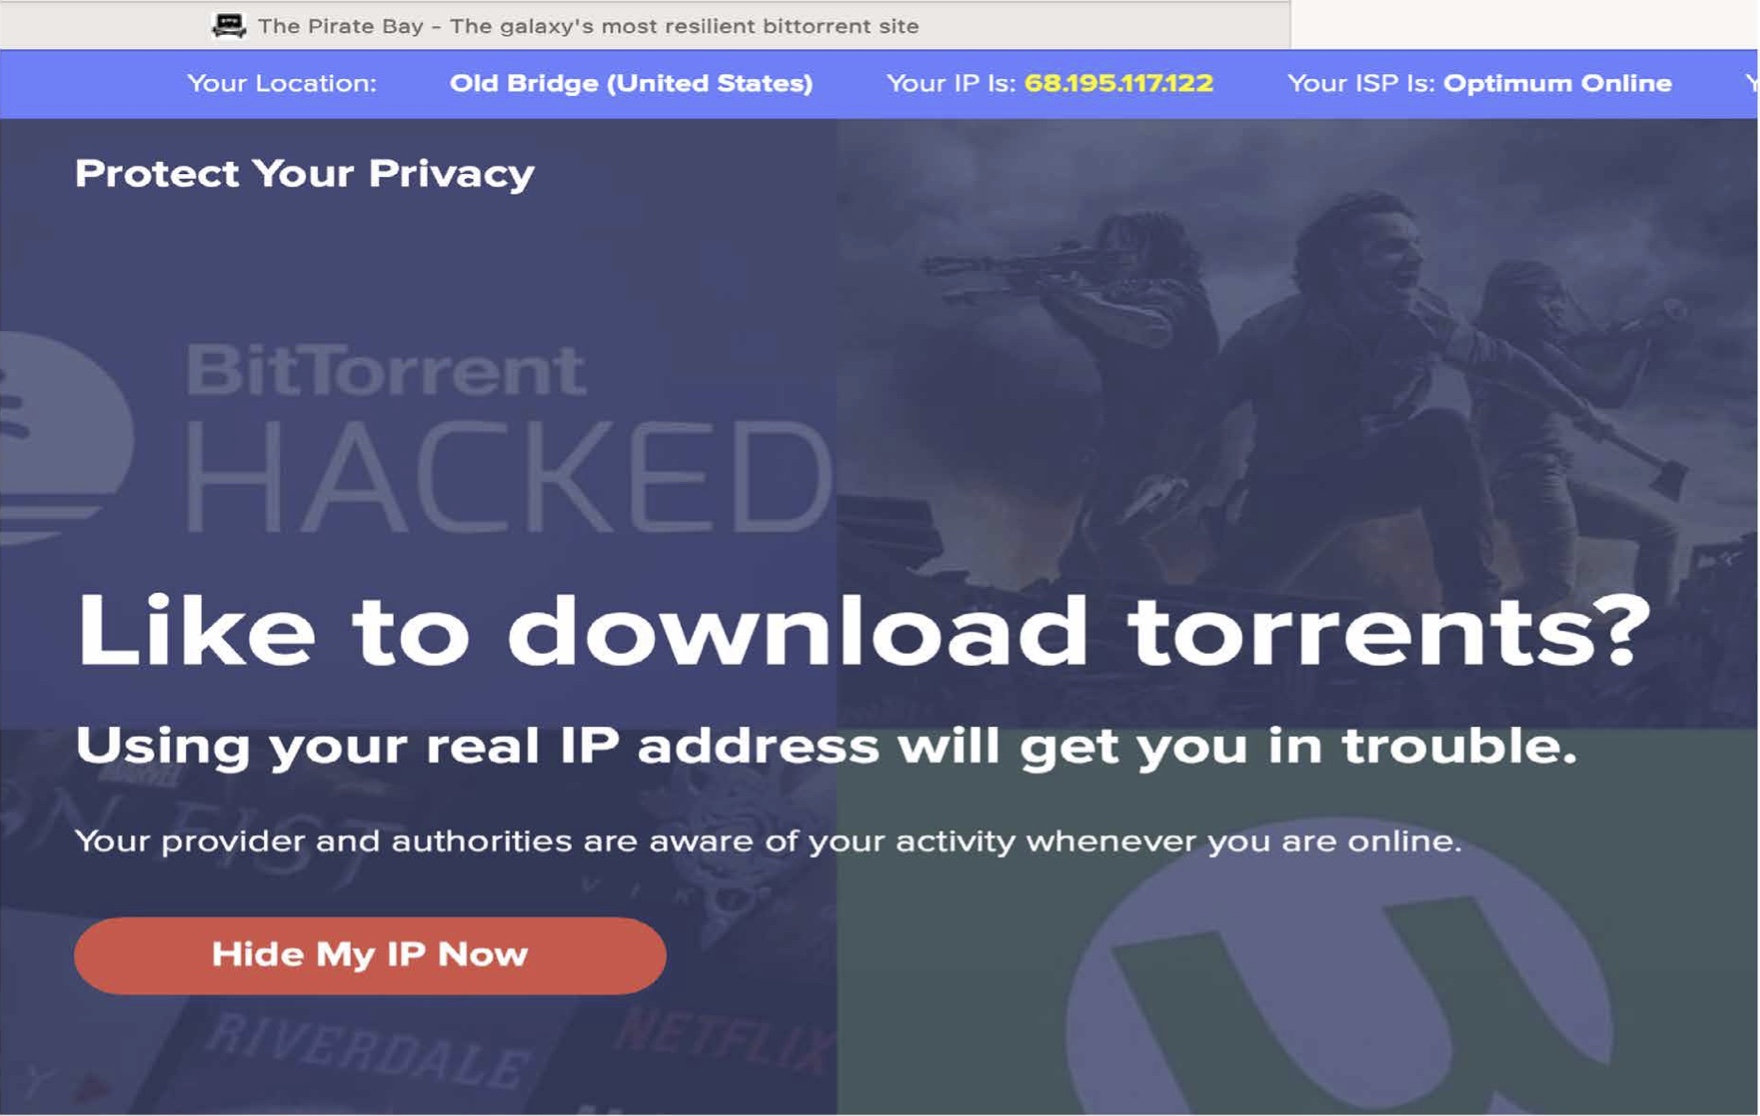 The Pirate Bay - The galaxy's most resilient bittorrent site.pdf